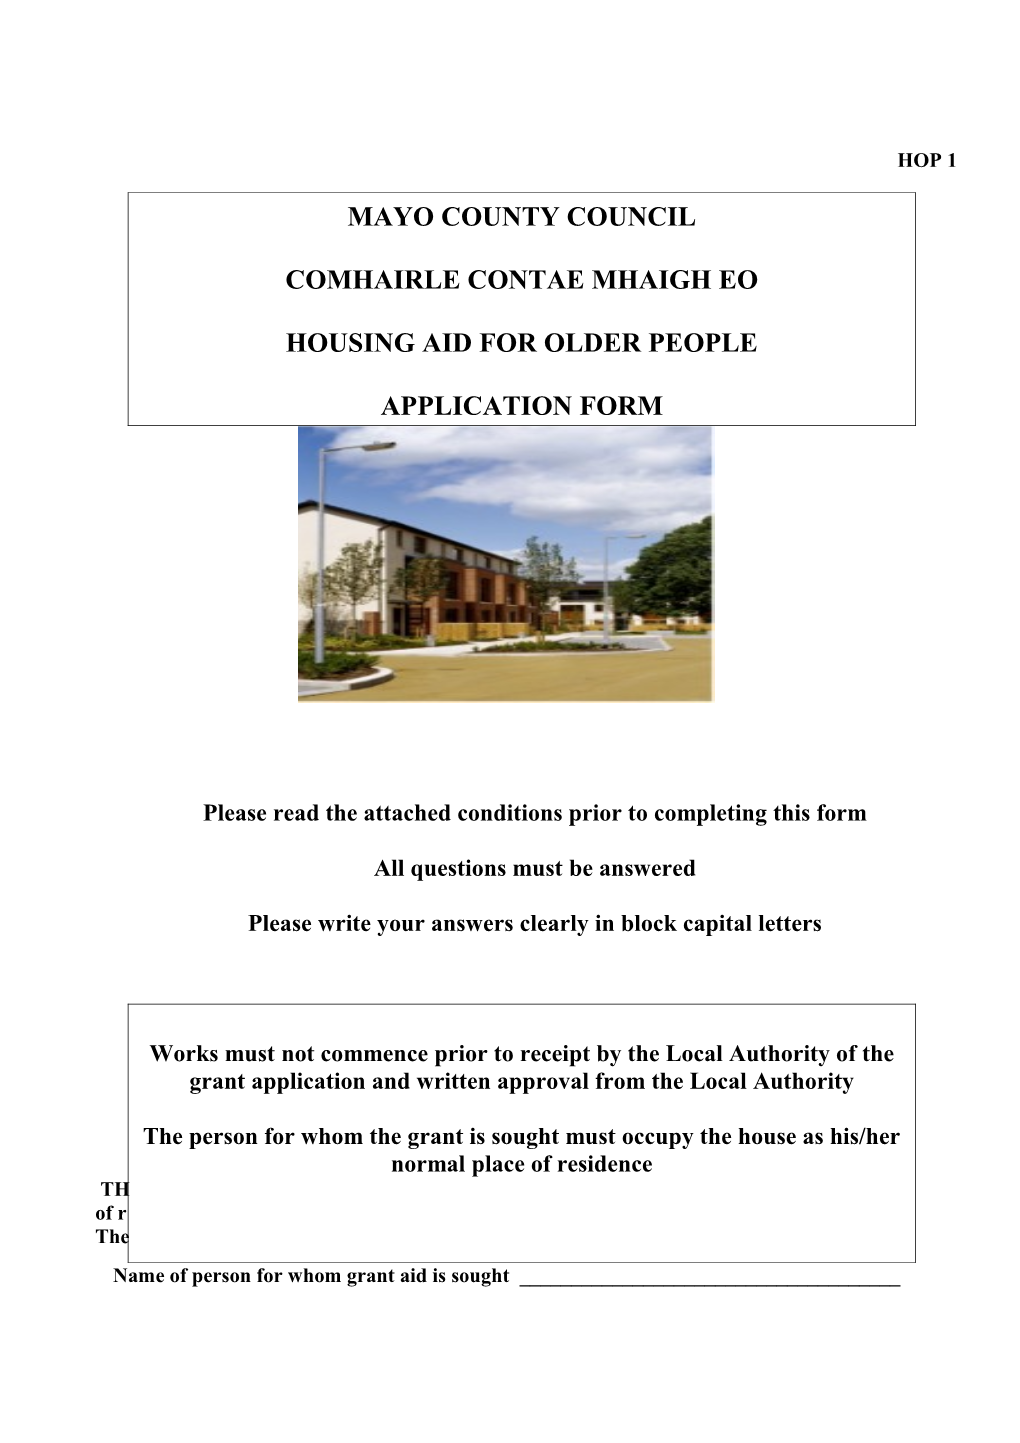 Please Read the Attached Conditions Prior to Completing This Form